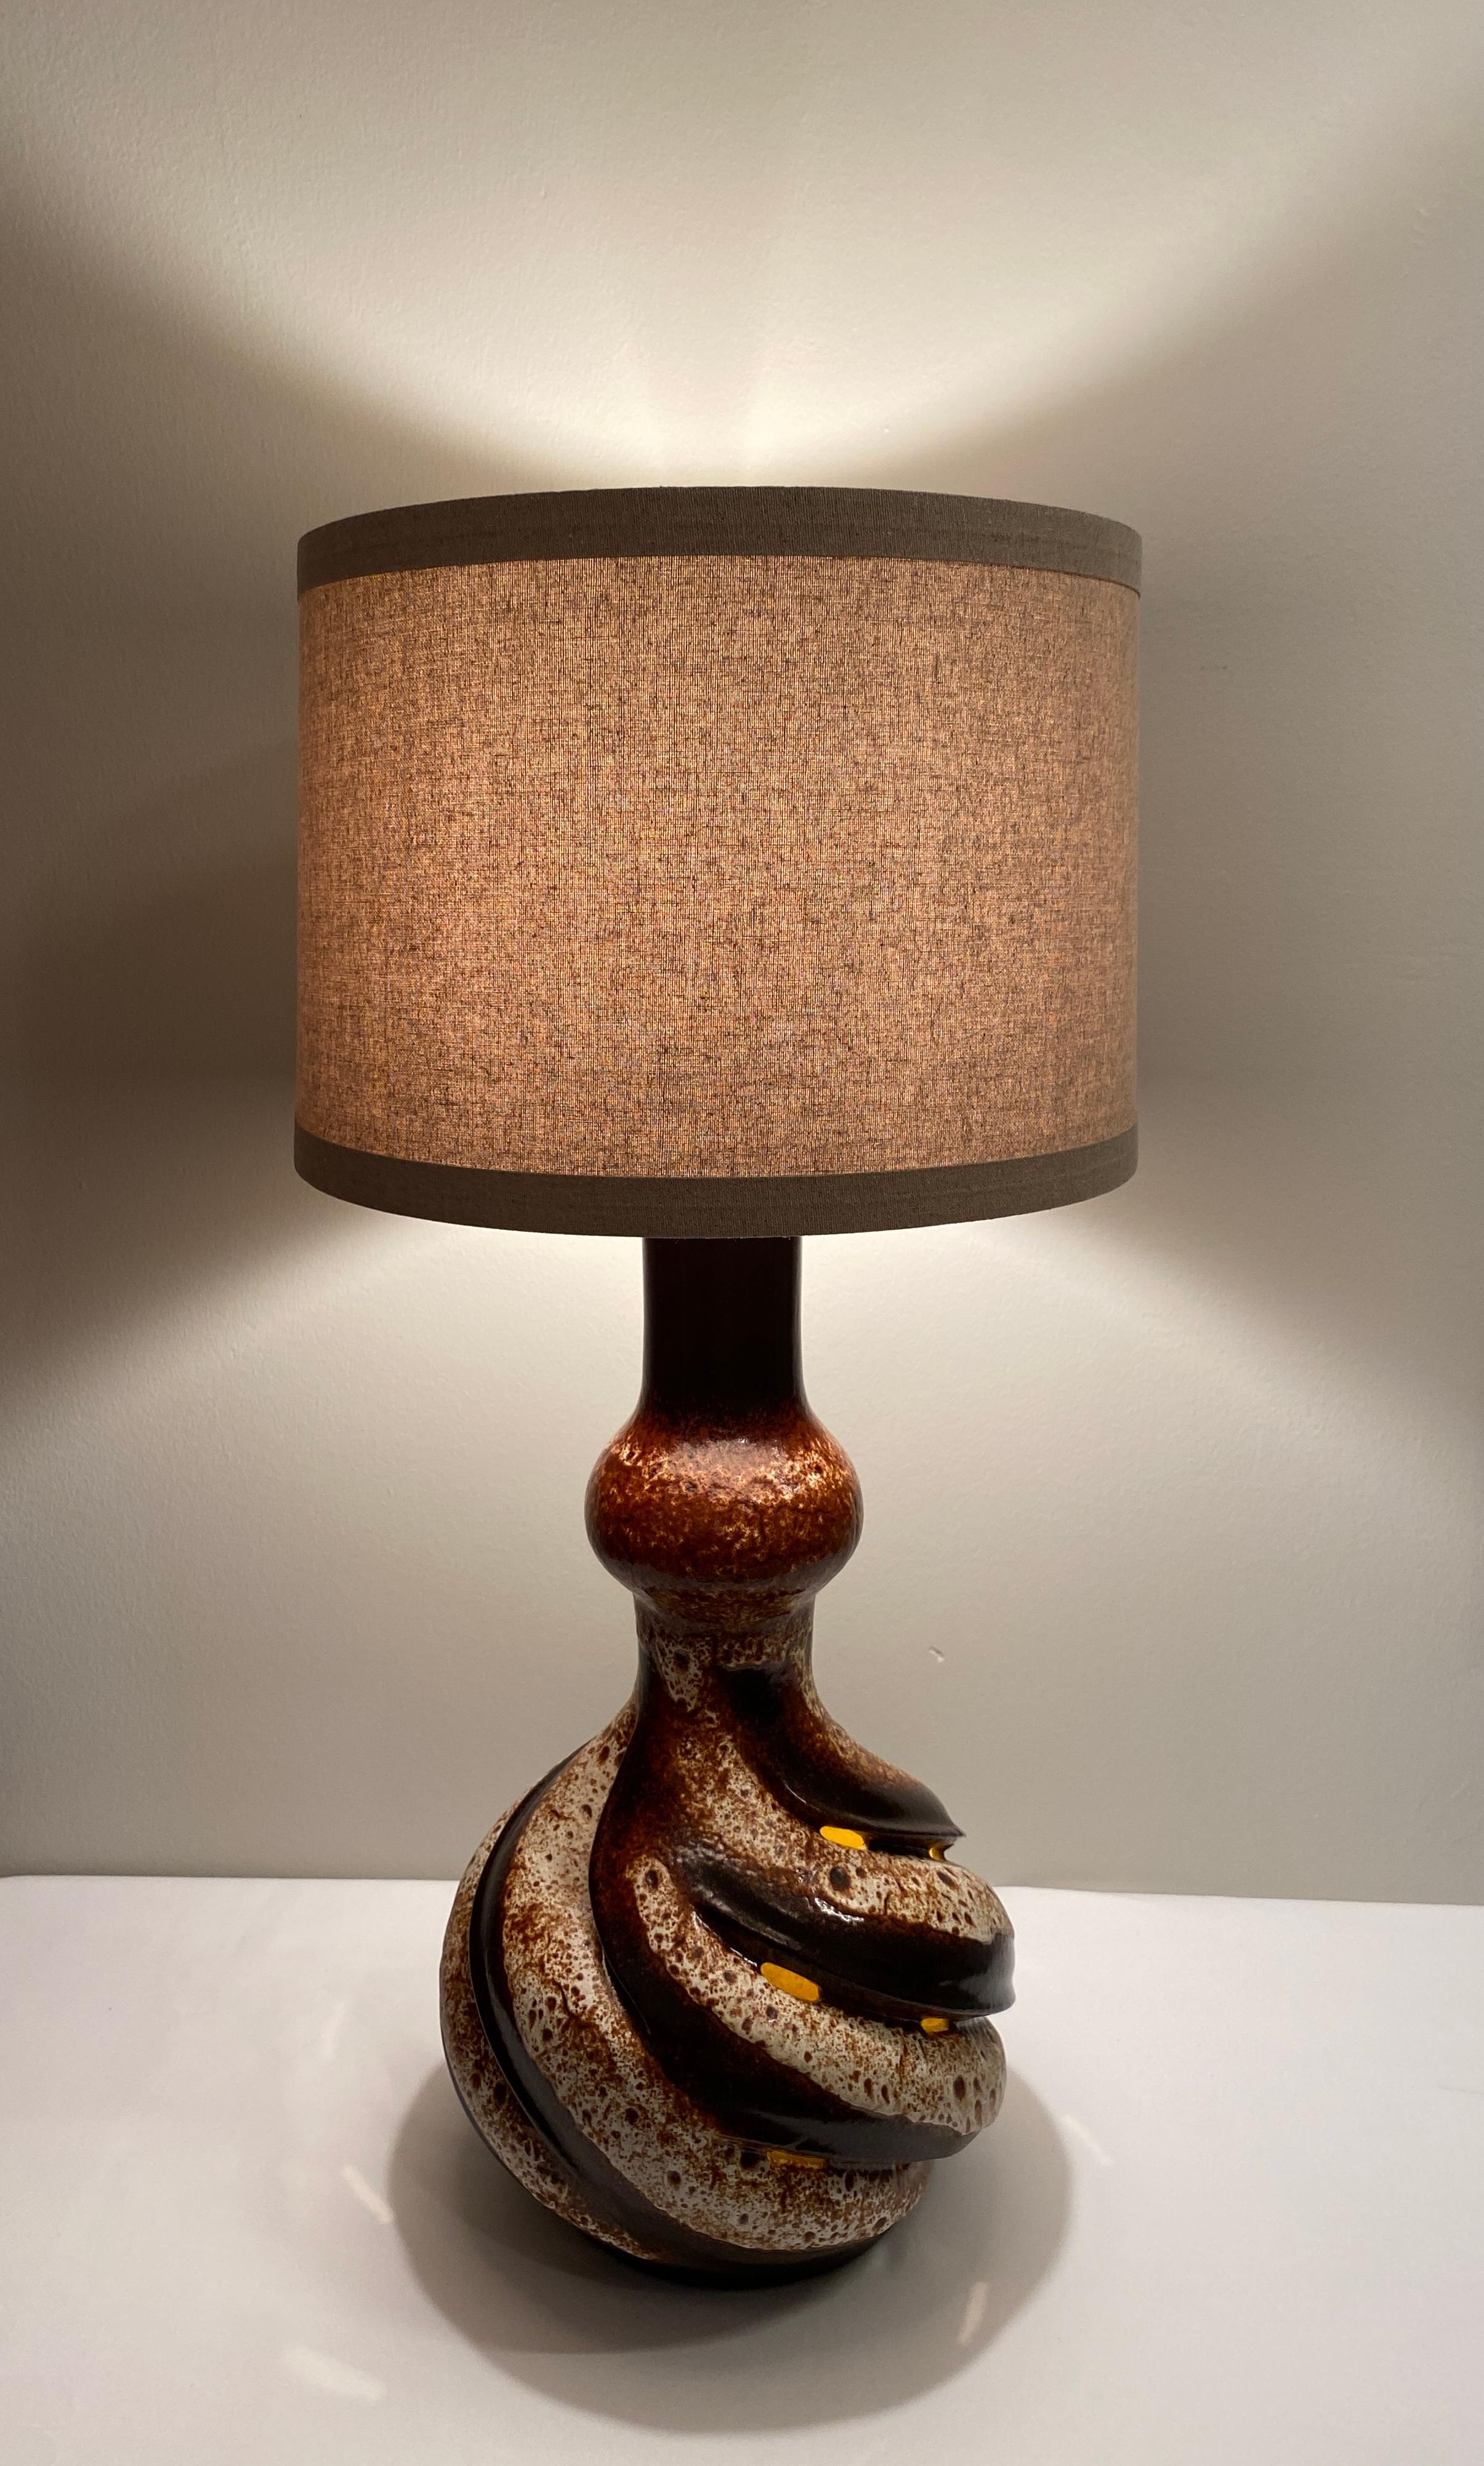 Large and very decorative table lamp from Vallauris, France. Very attractive mid-century modern ceramic table lamp with neutral colors and form. This lamp has notable sculptural work.

The muted beige and brown base has many attractive details. This